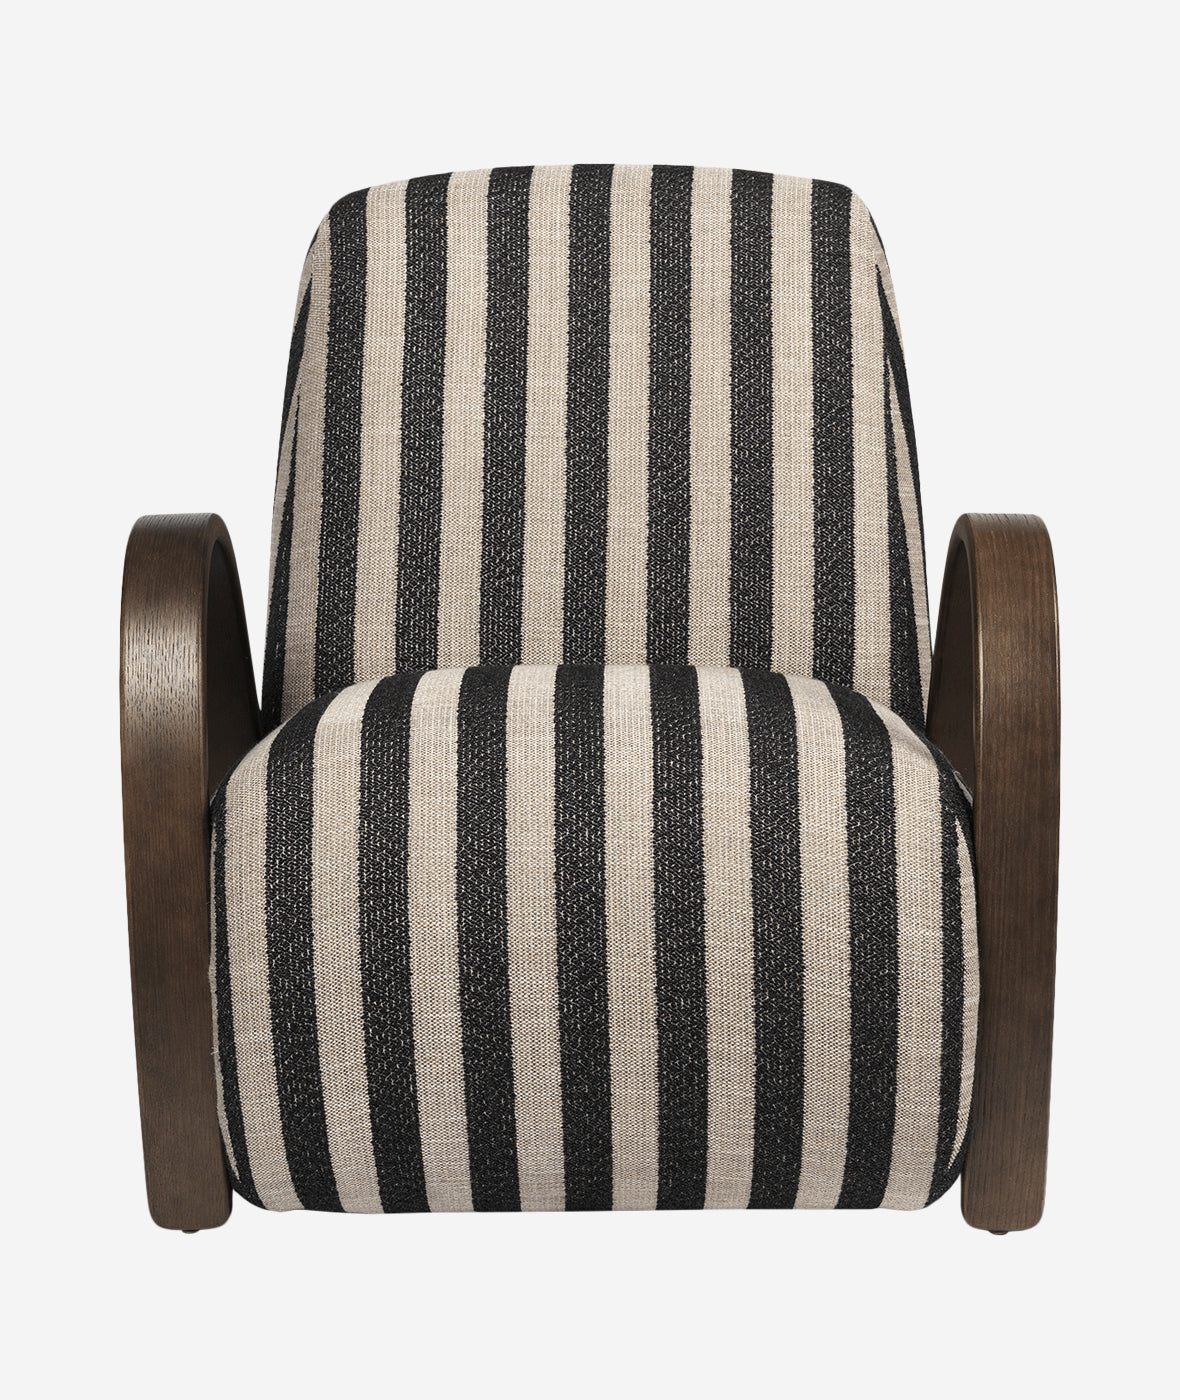 Buur Lounge Chair - More Options